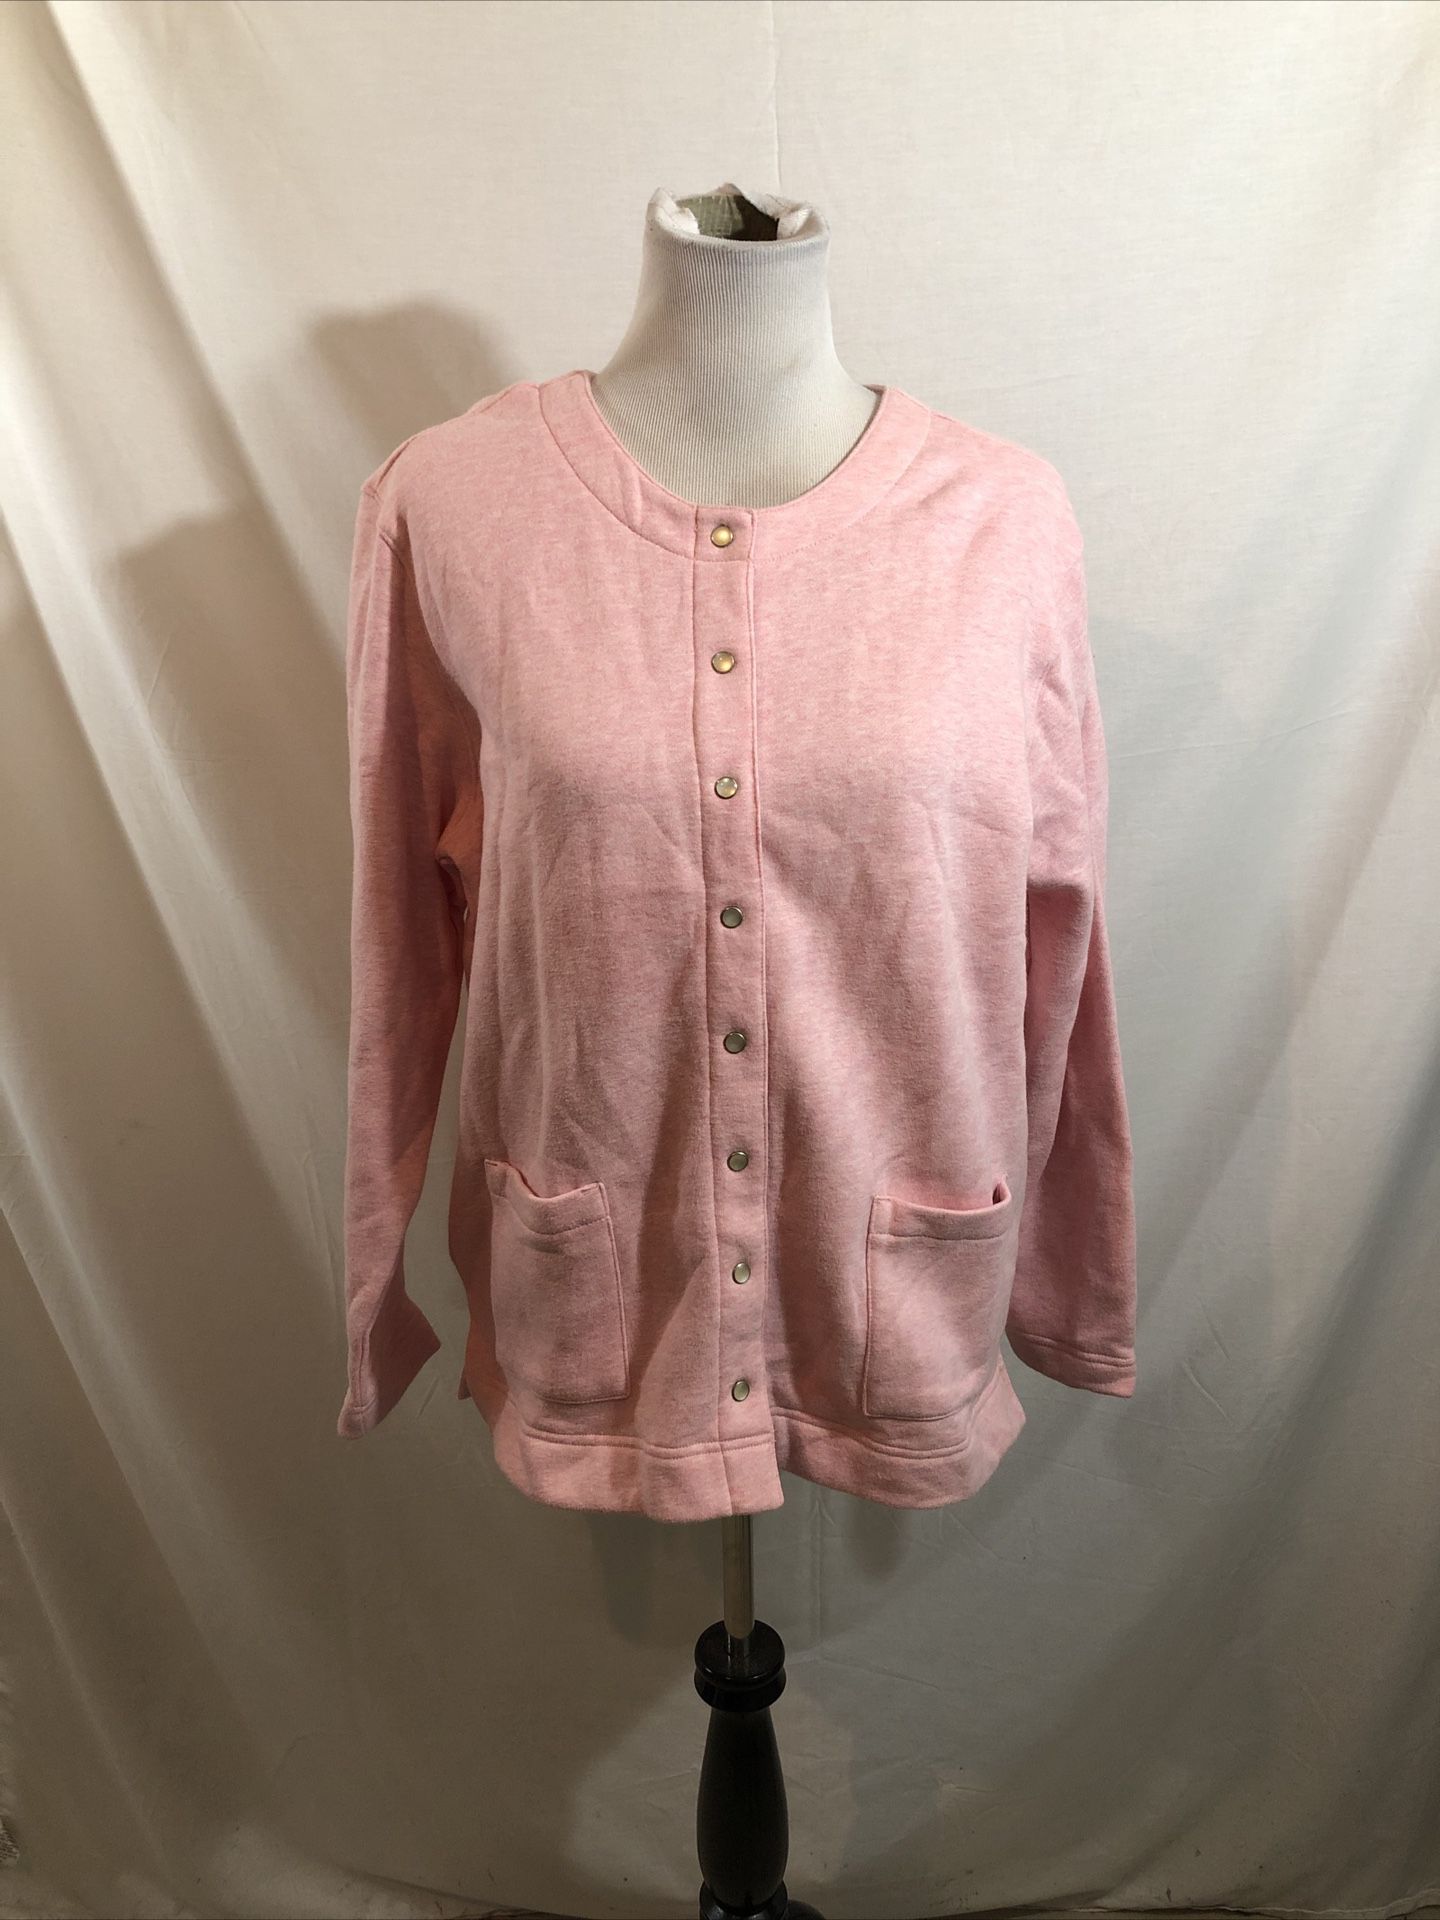 Classic Elements Pink Snap Front Jacket - Womens L, NWT, Bust 22.5”, Length 26”